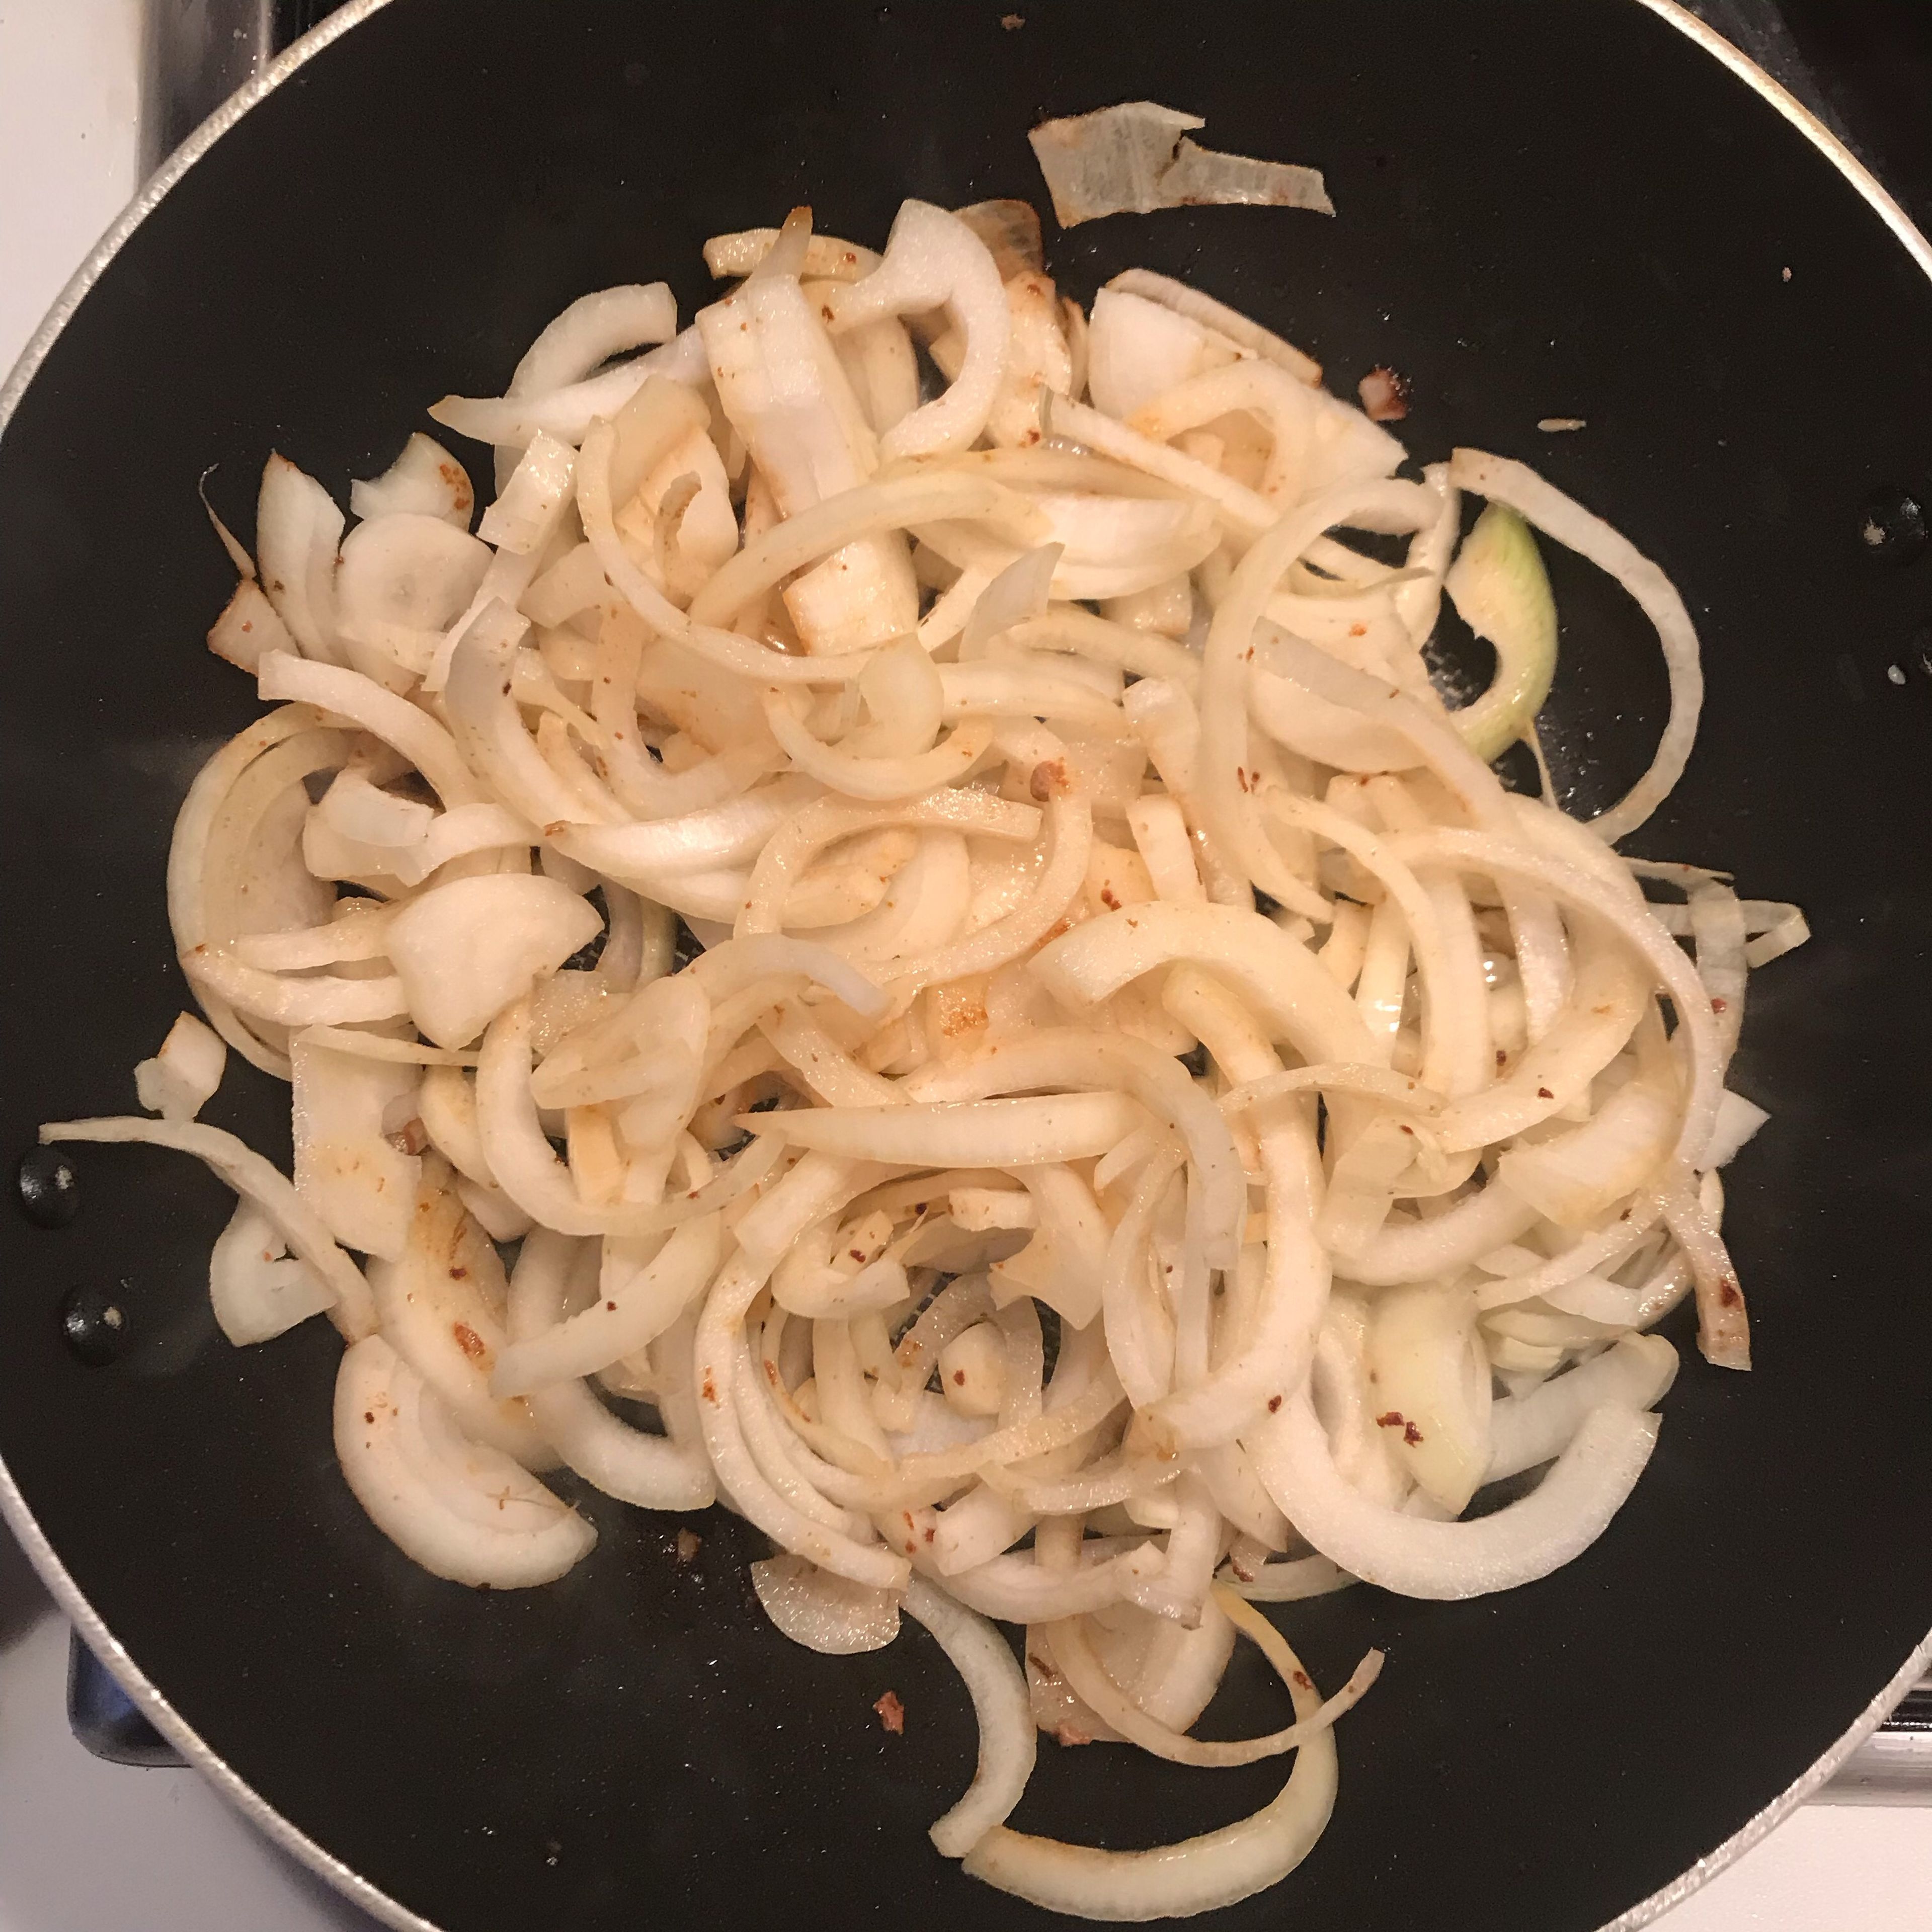 Peel and halve the onions and cut into crescent slices, about 1cm wide at the thickest part. Sauté these in the pan in which you cooked the sausages until soft but not coloured.